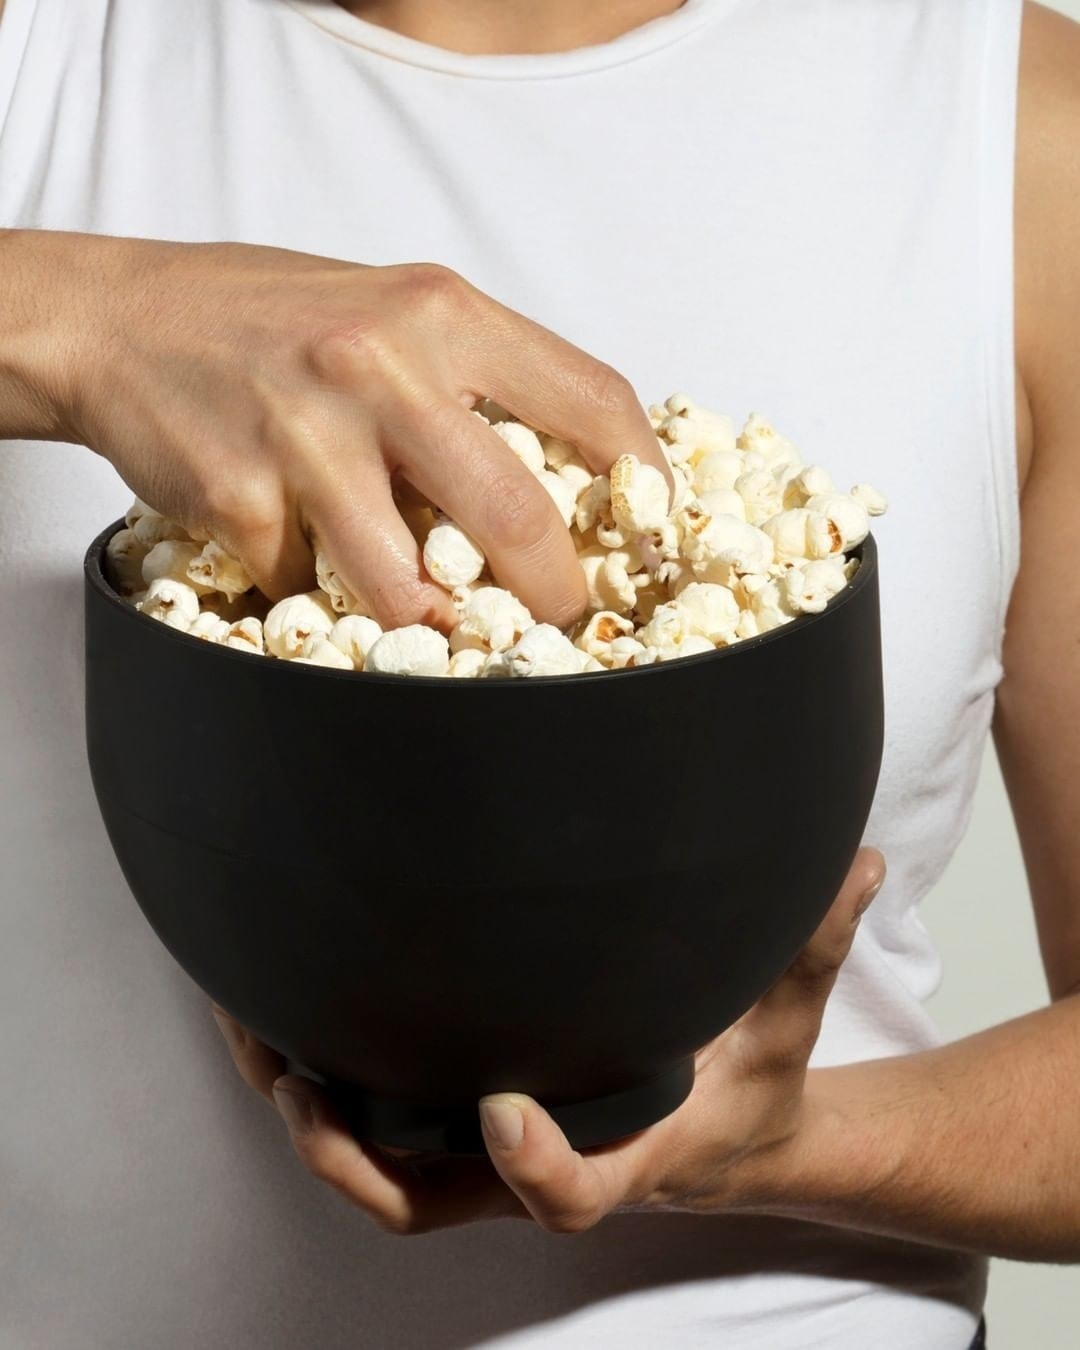 someone grabbing a fistful of popcorn out of the collapsible bowl